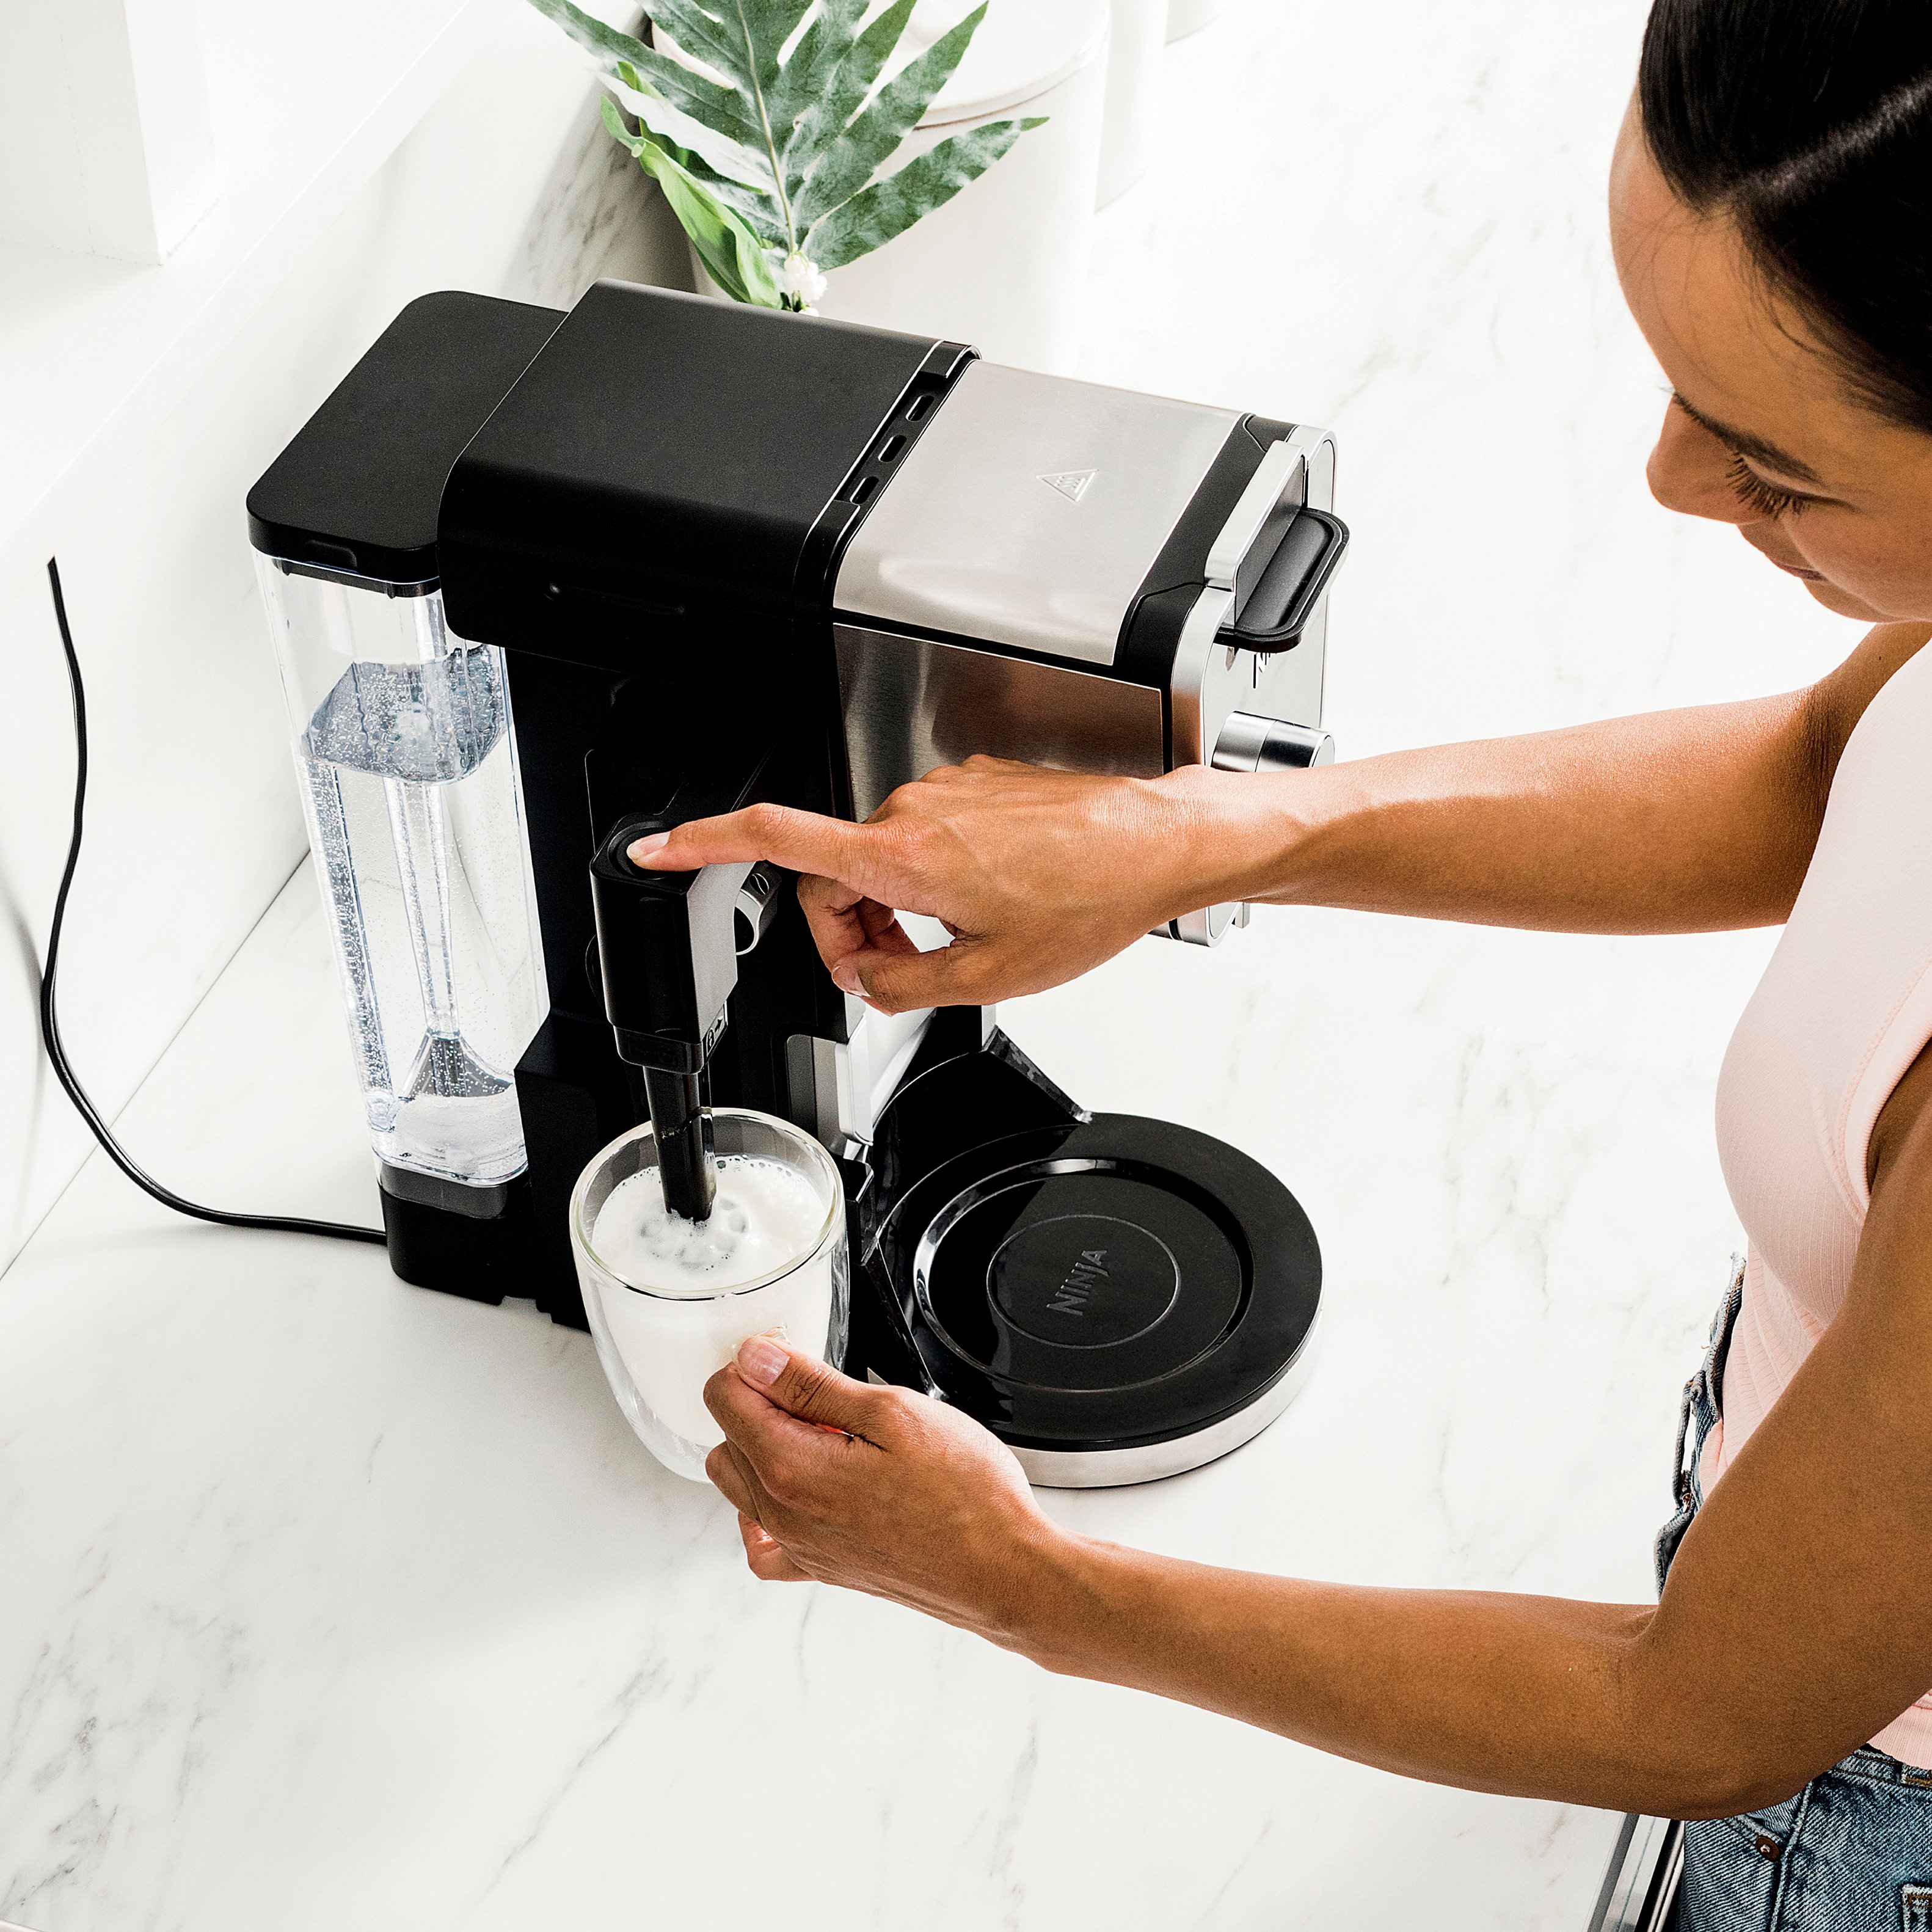 Ninja Dual Brew Specialty Coffee System with Fold Away Frother